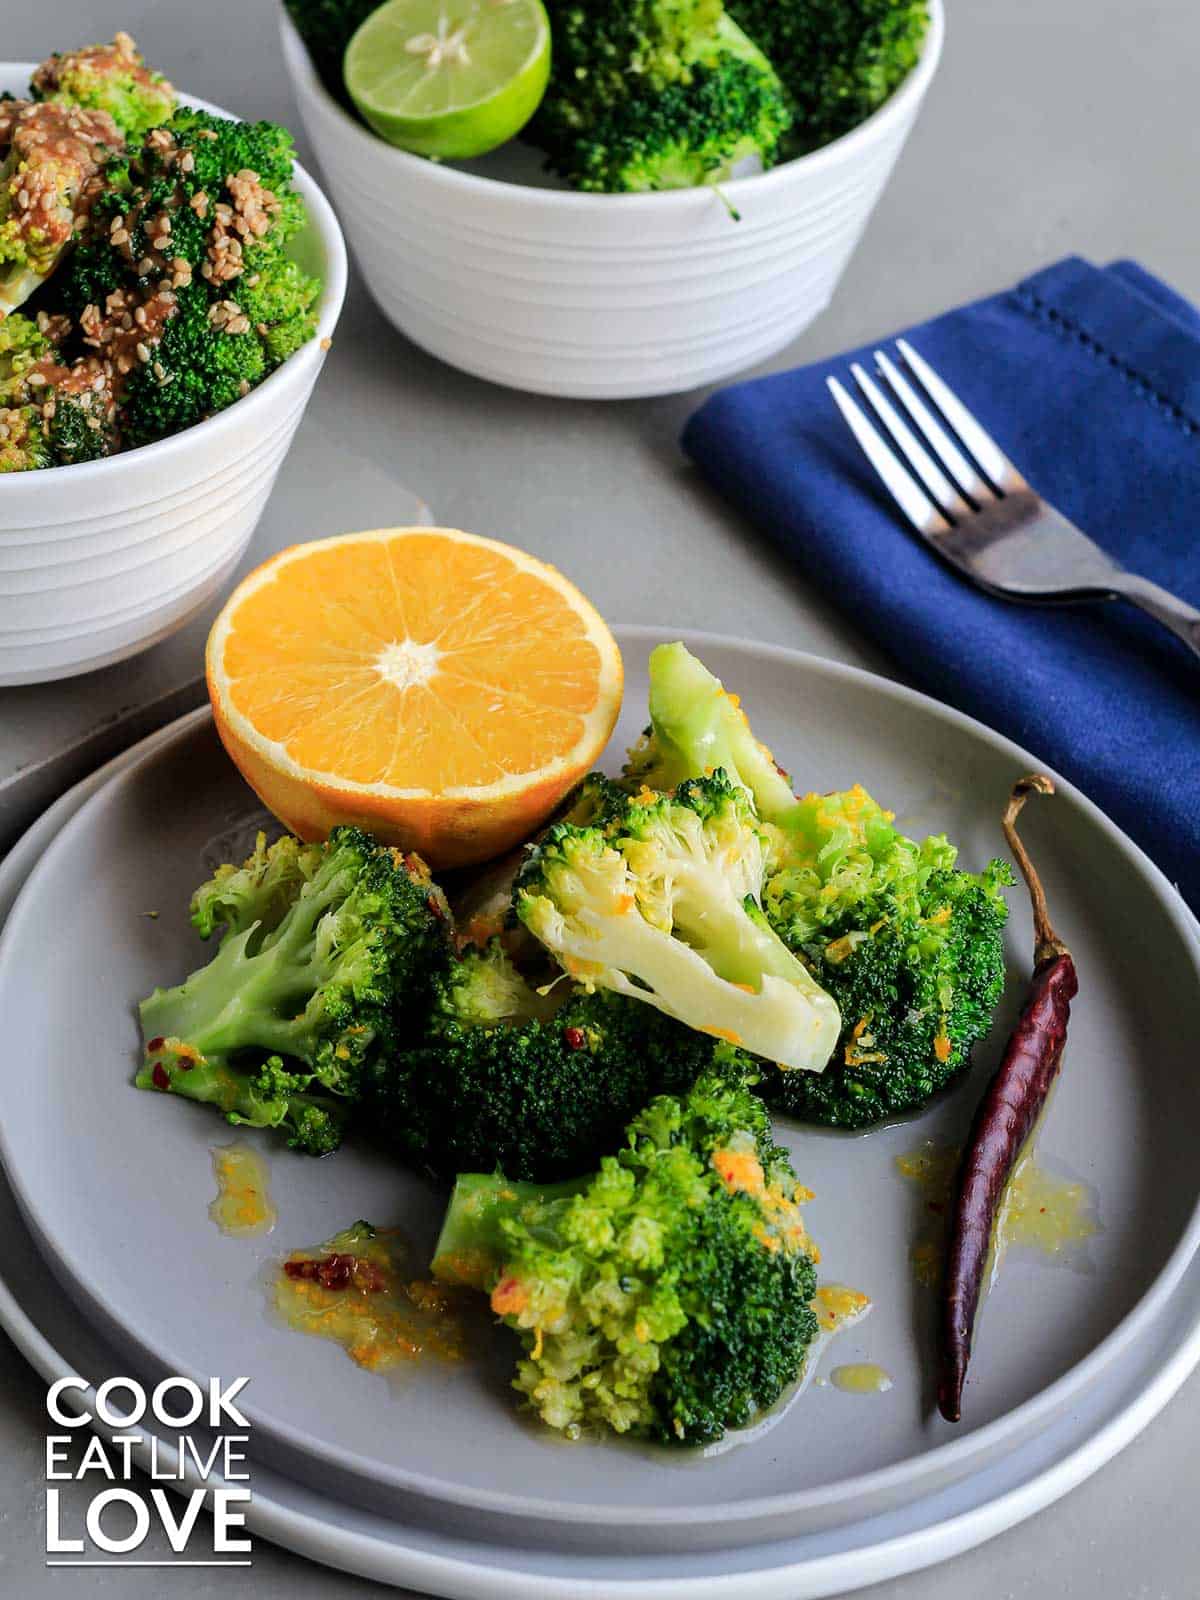 Broccoli on a plate with orange and chile garnish.